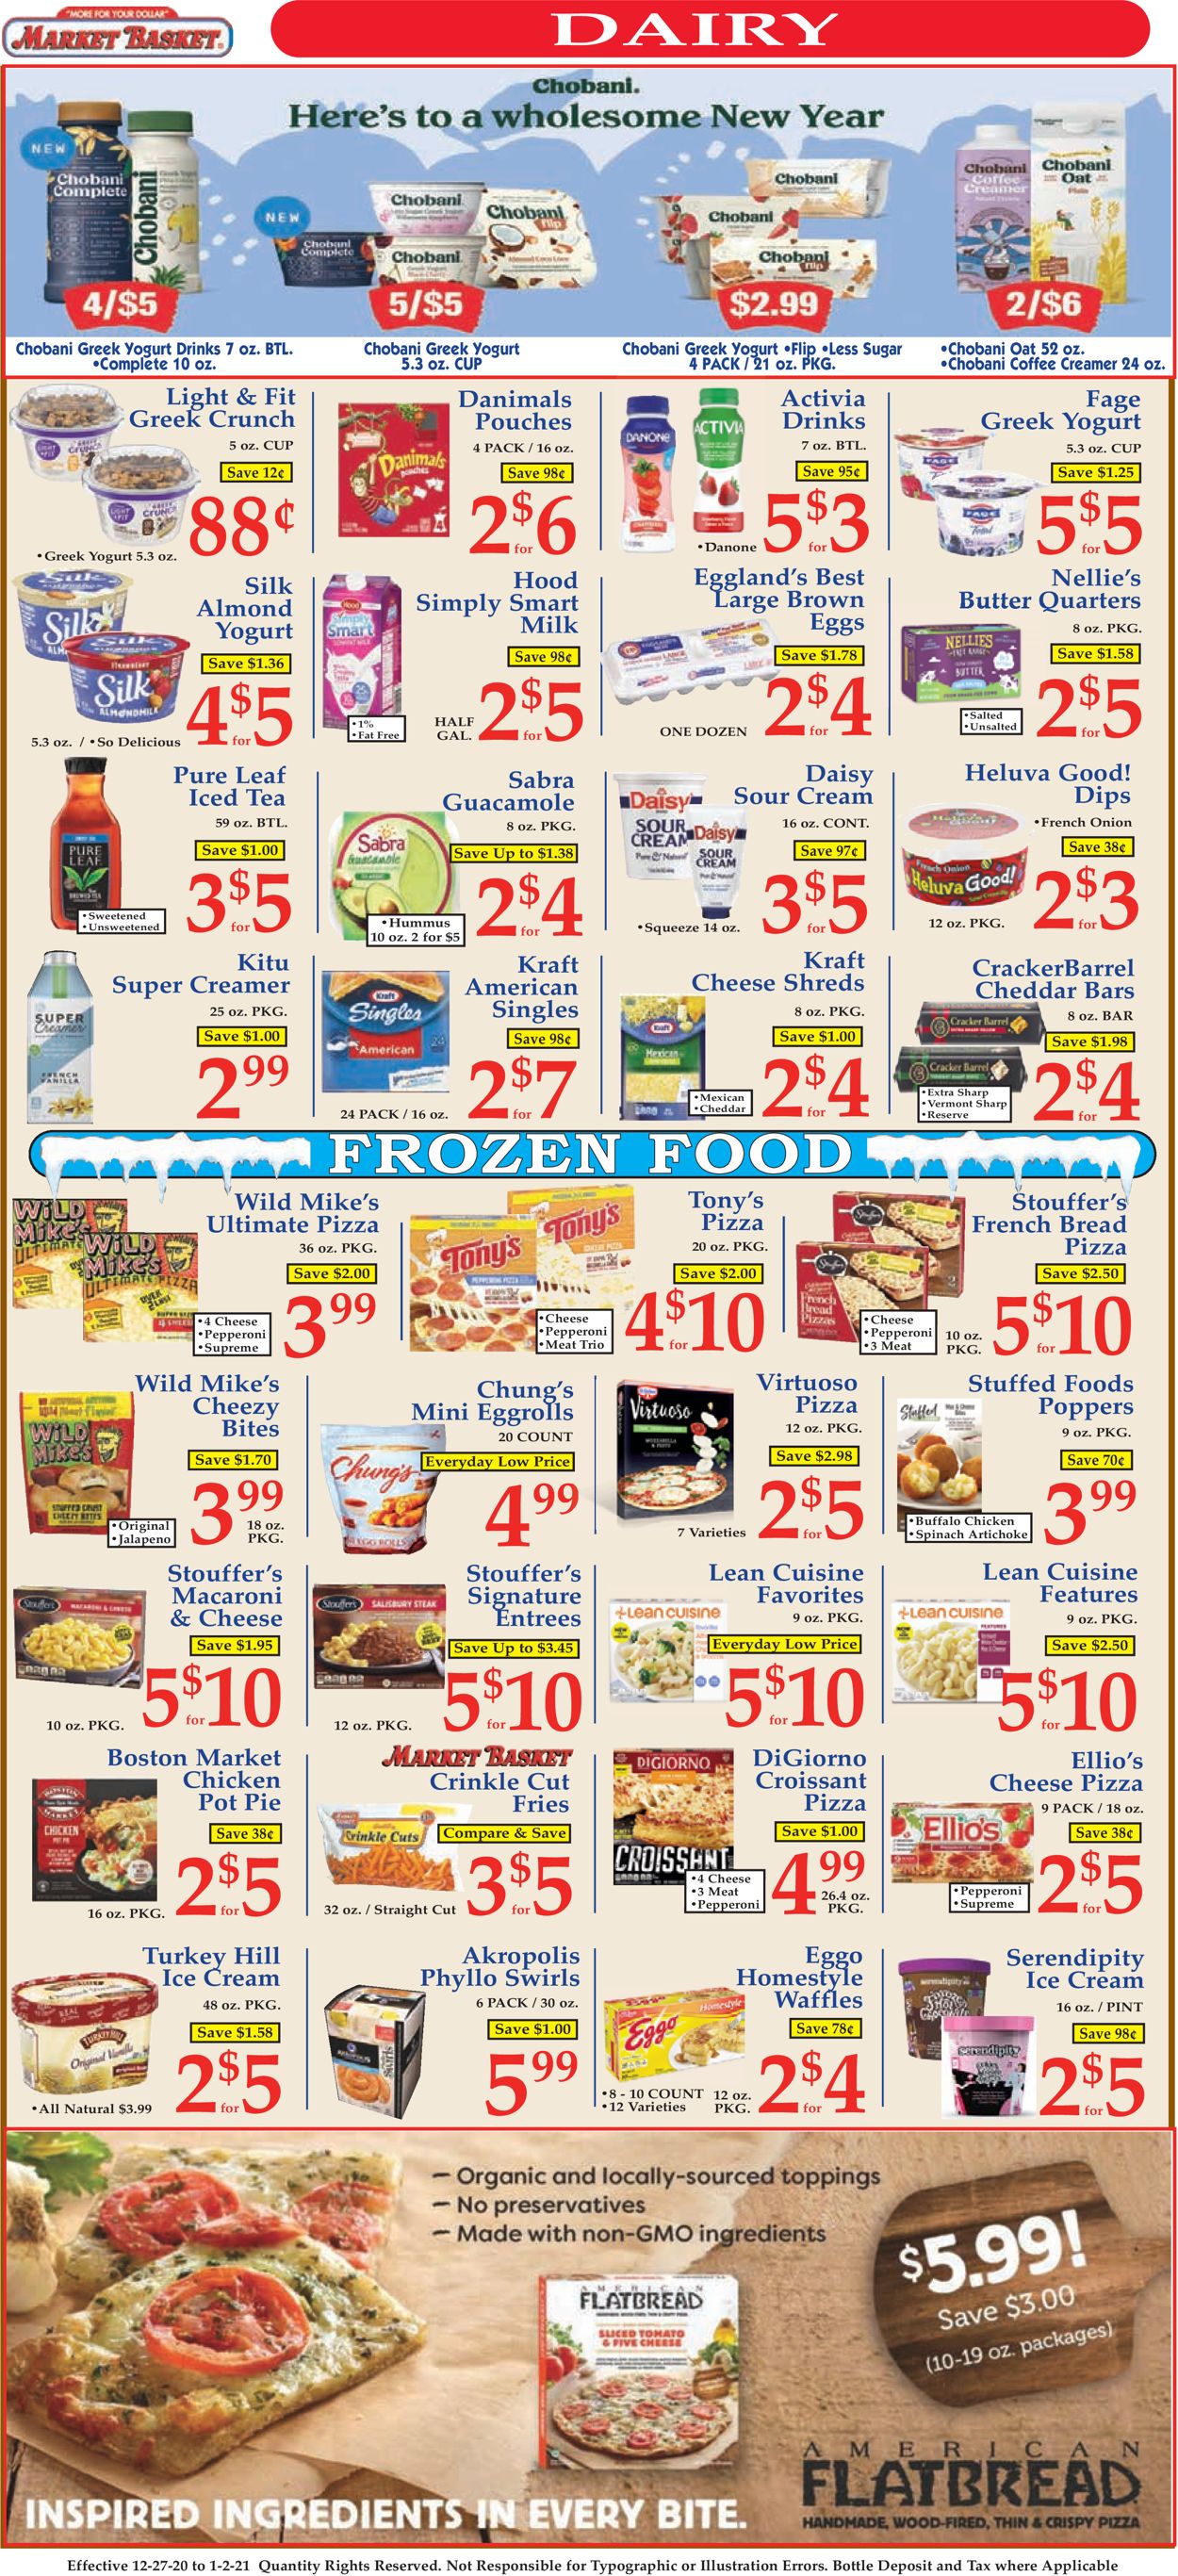 Market Basket Current weekly ad 12/27 - 01/02/2021 [5] - frequent-ads.com